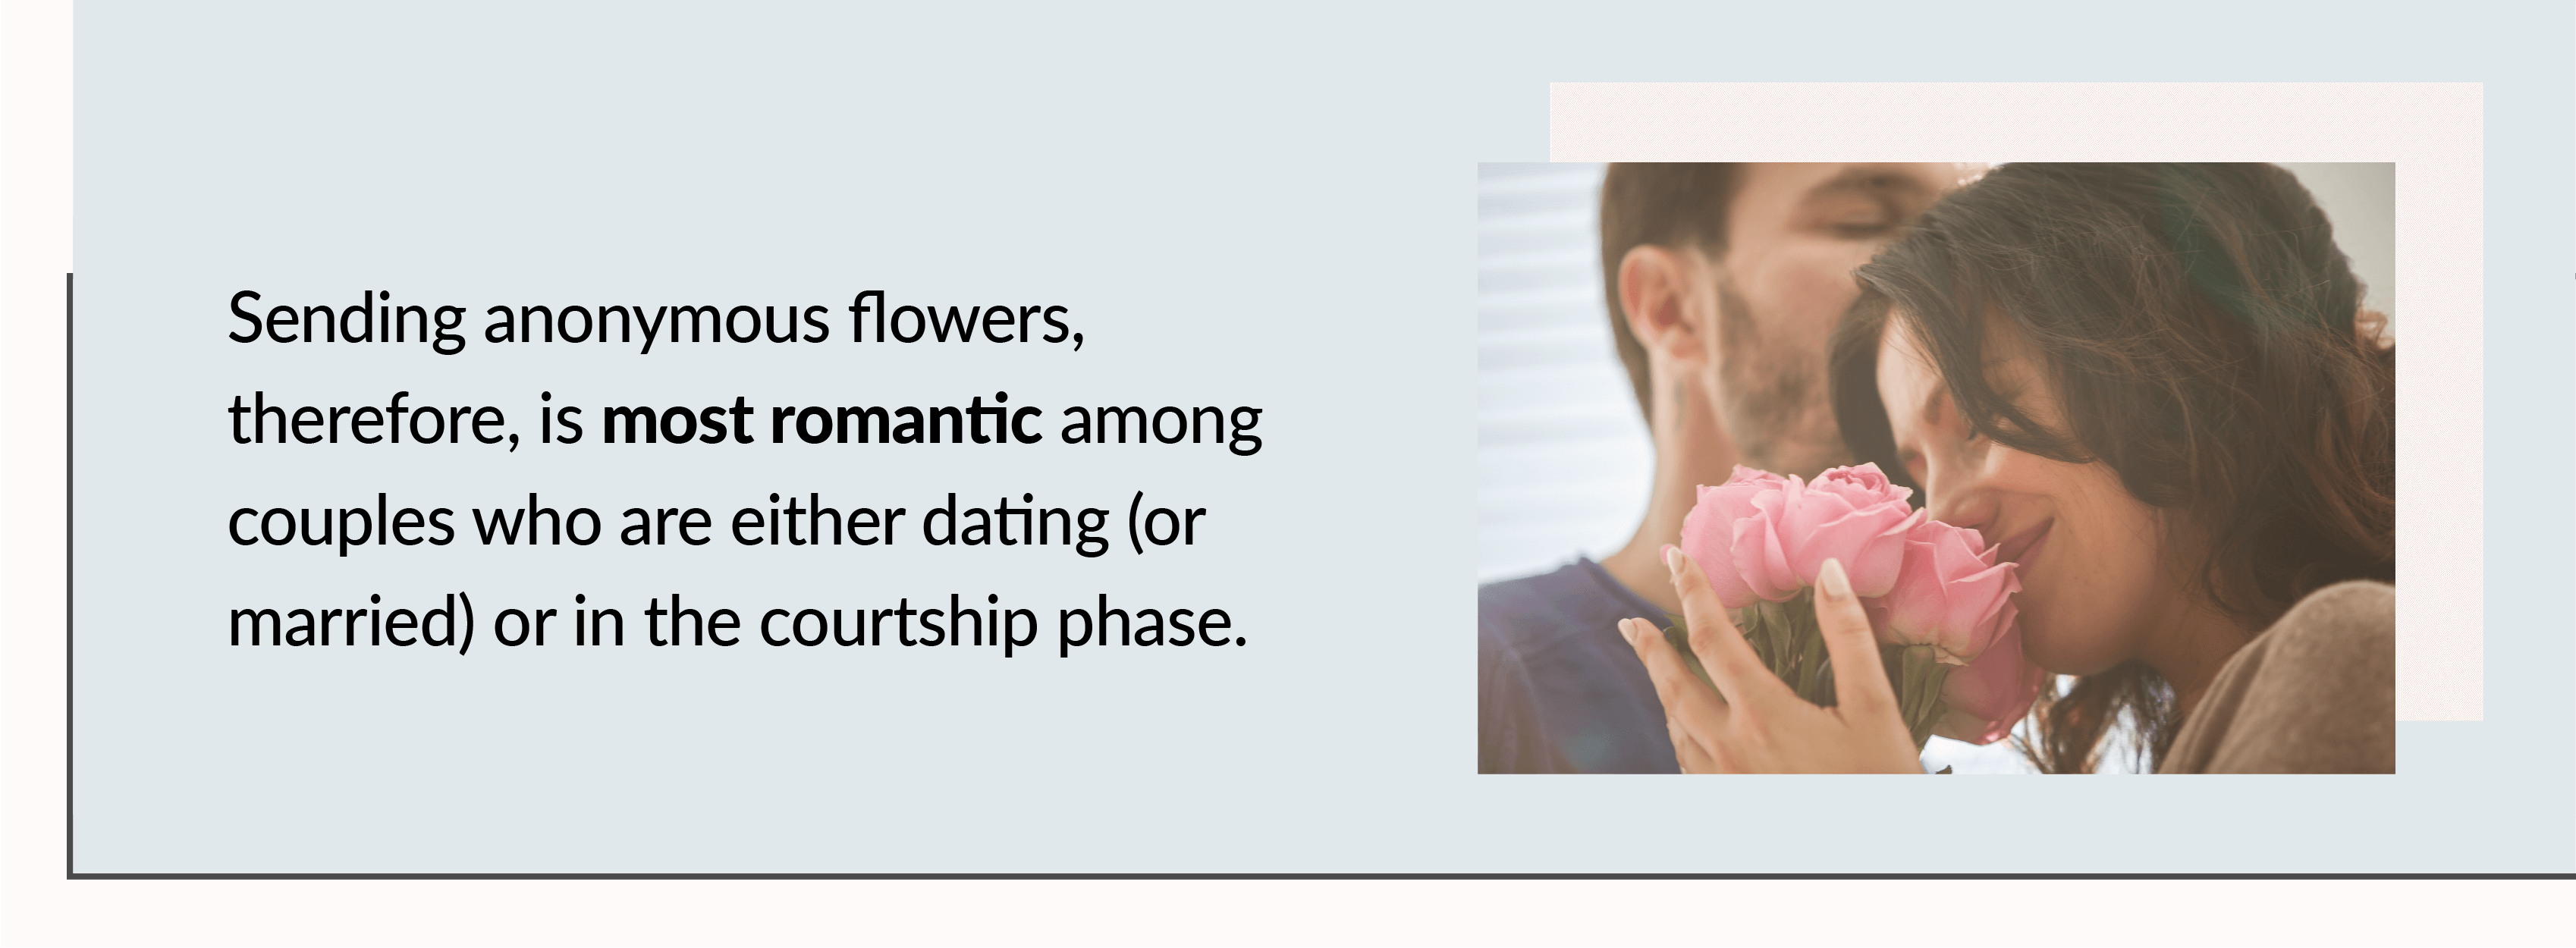 most romantic flowers among couples